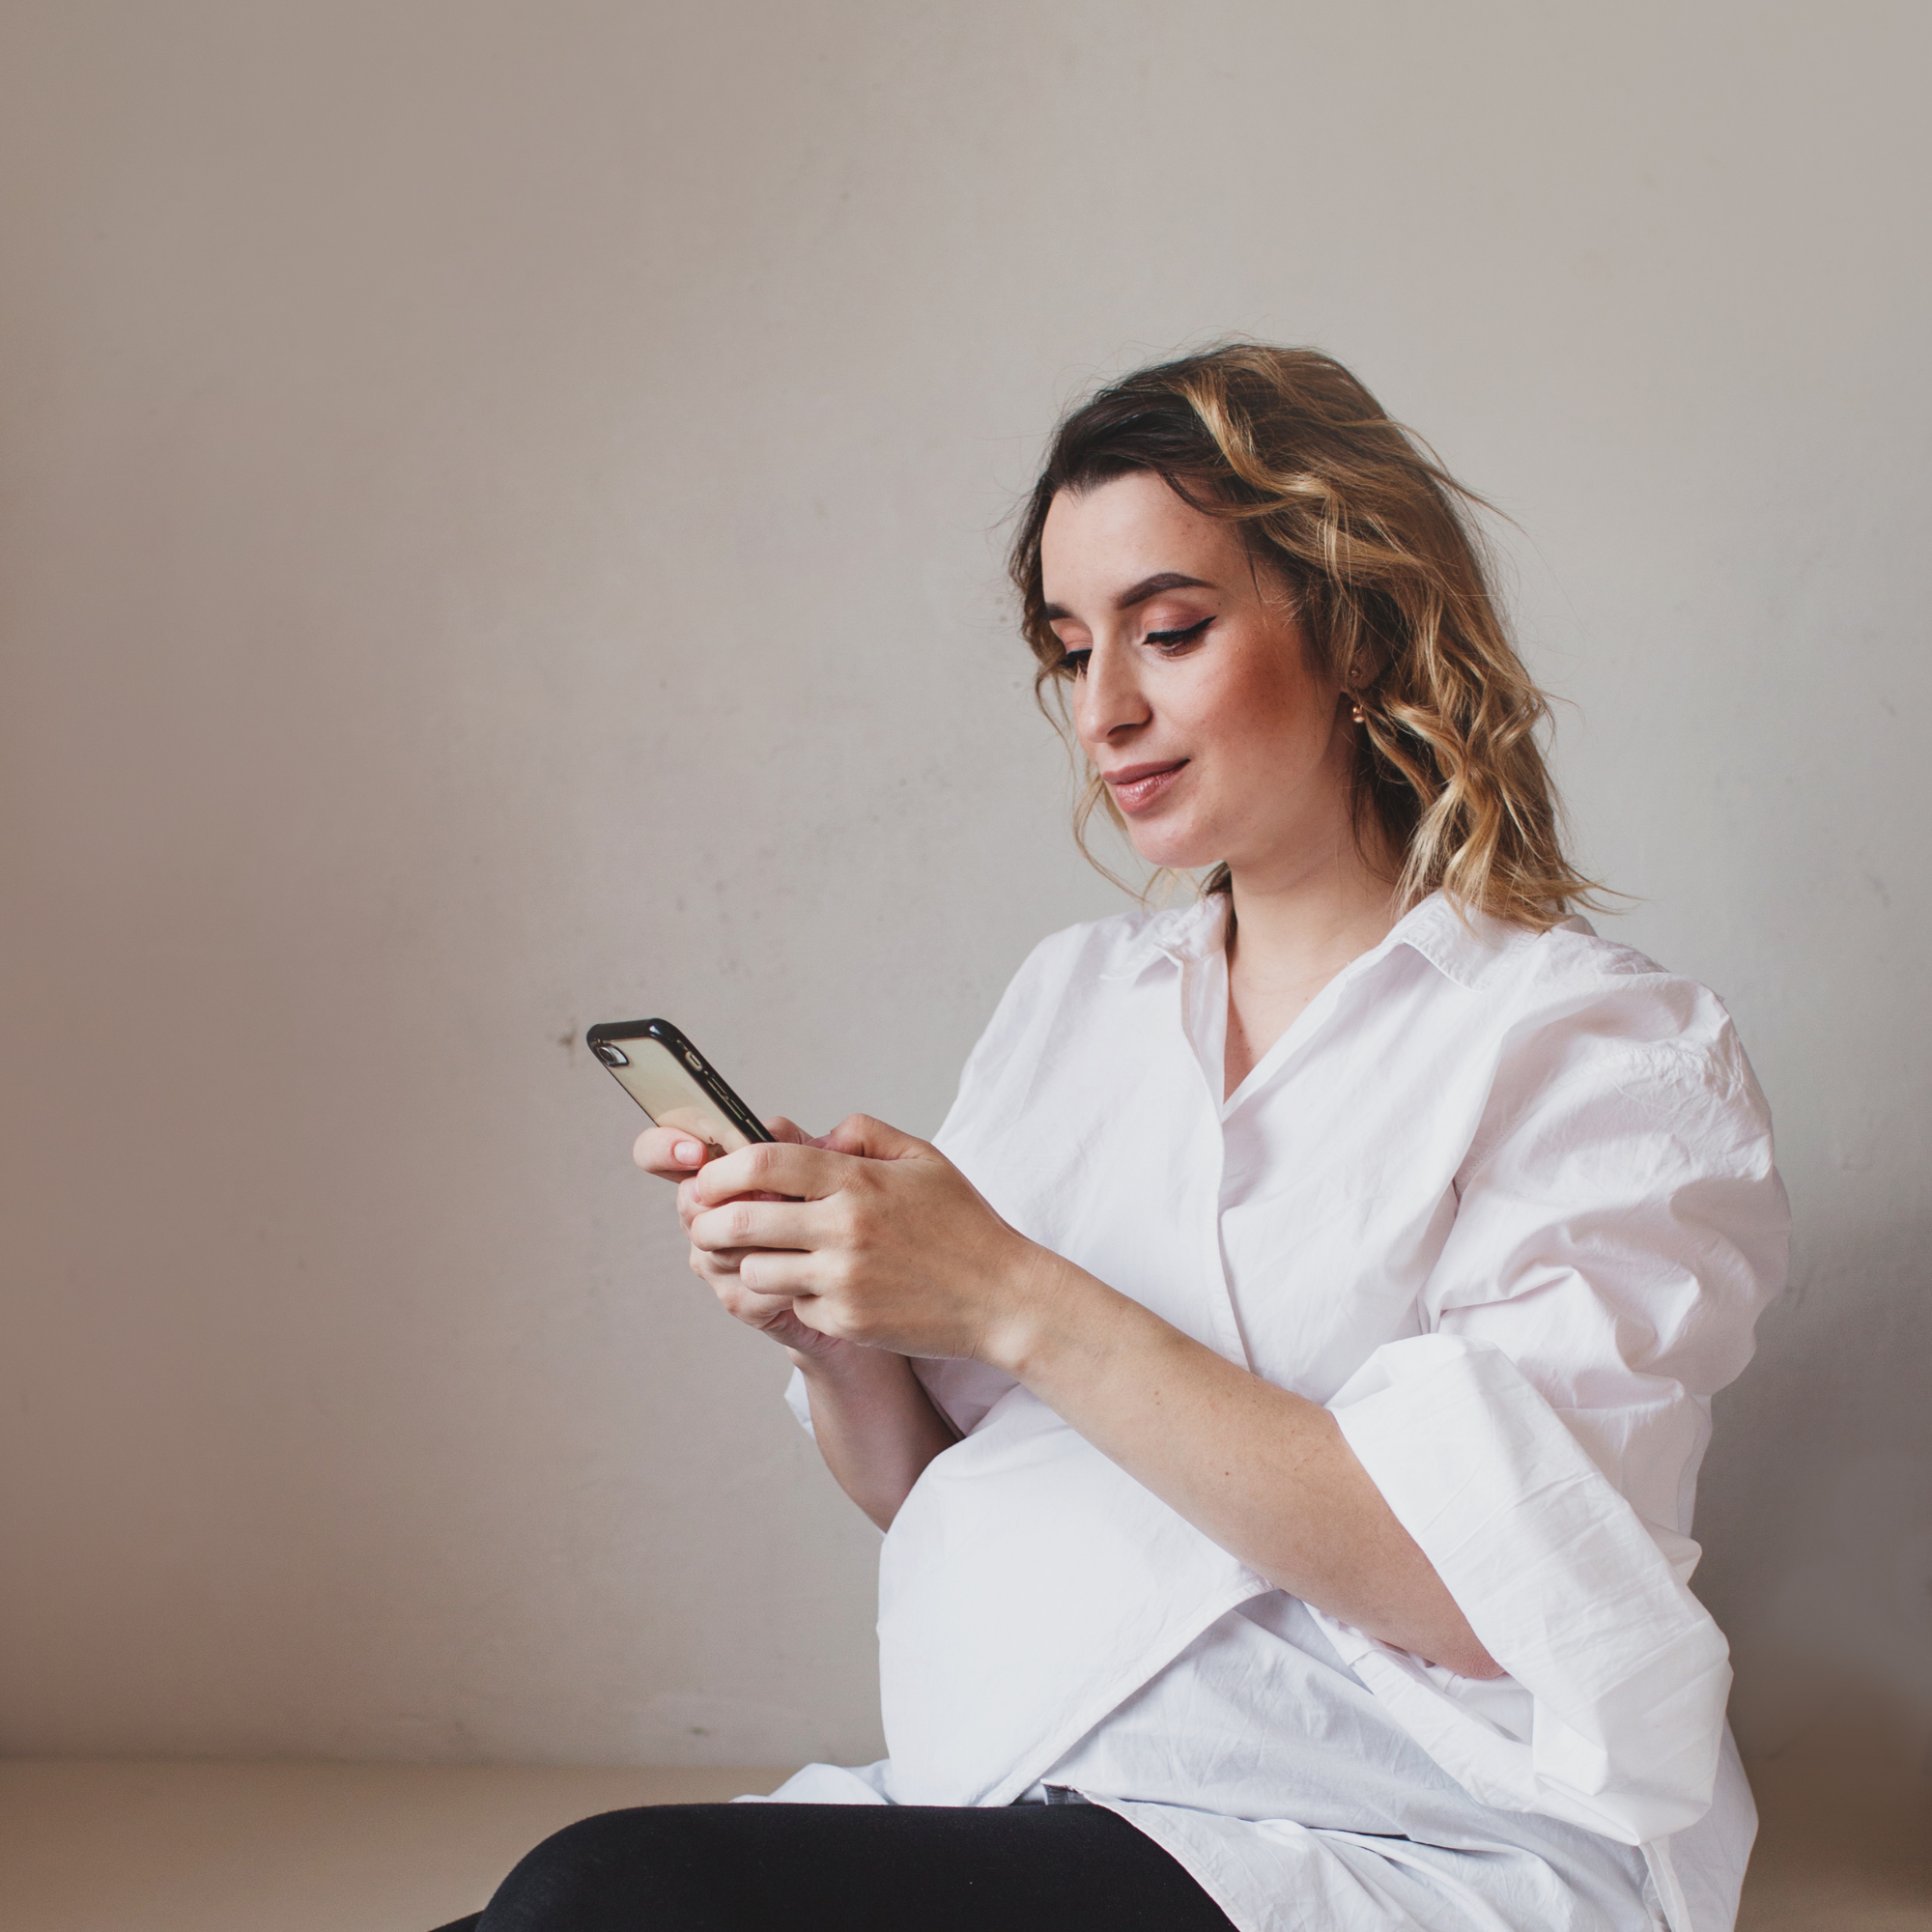 Pregnant mum wearing a white shirt against a grey back drop scrolling on her phone | Pregnancy Tips - Clair de Lune UK